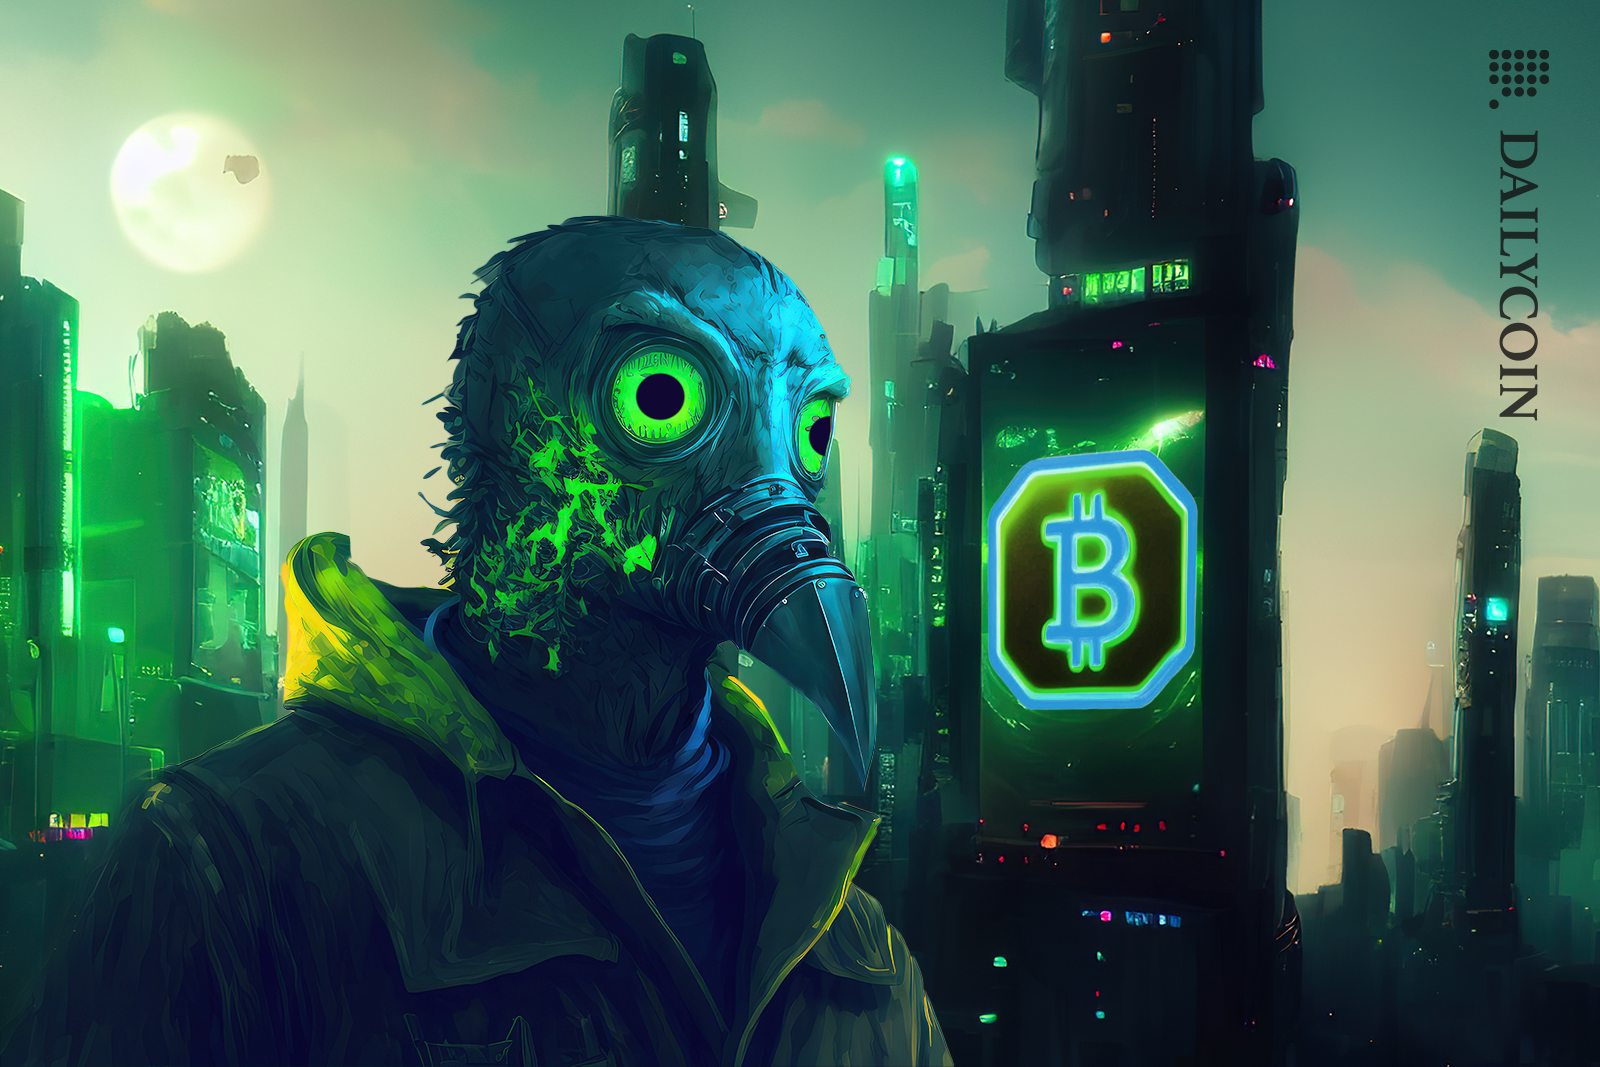 Plague doctor with wide eyes at a green toxic city with Bitcoin billboard behind him.